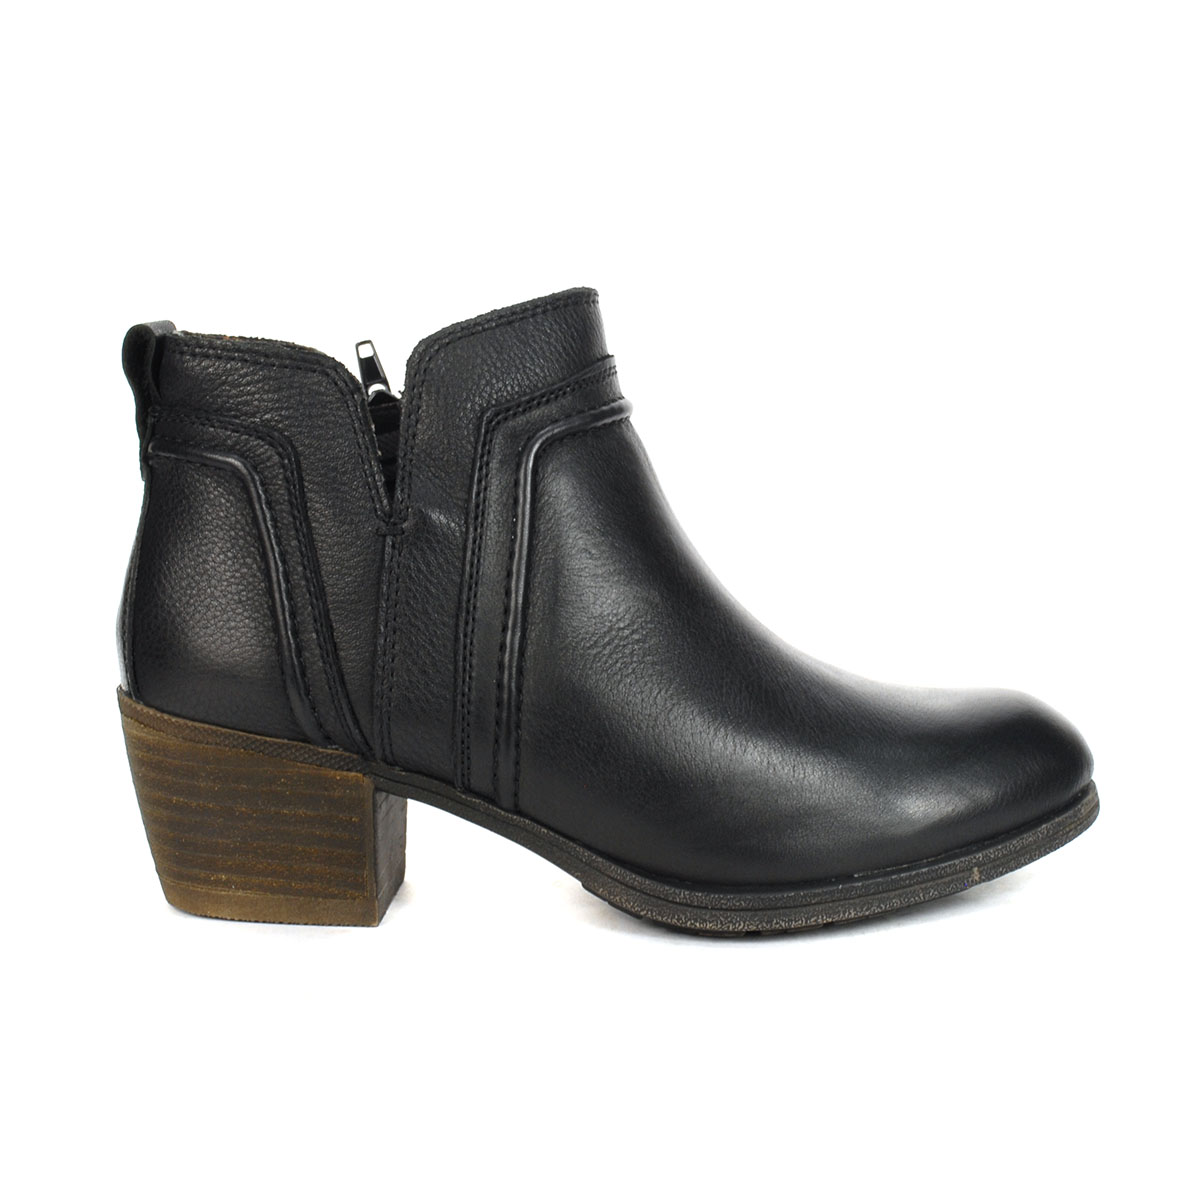 Rockport Cobb Hill Women's Anisa Vcut Black Leather Booties CH6159 ...